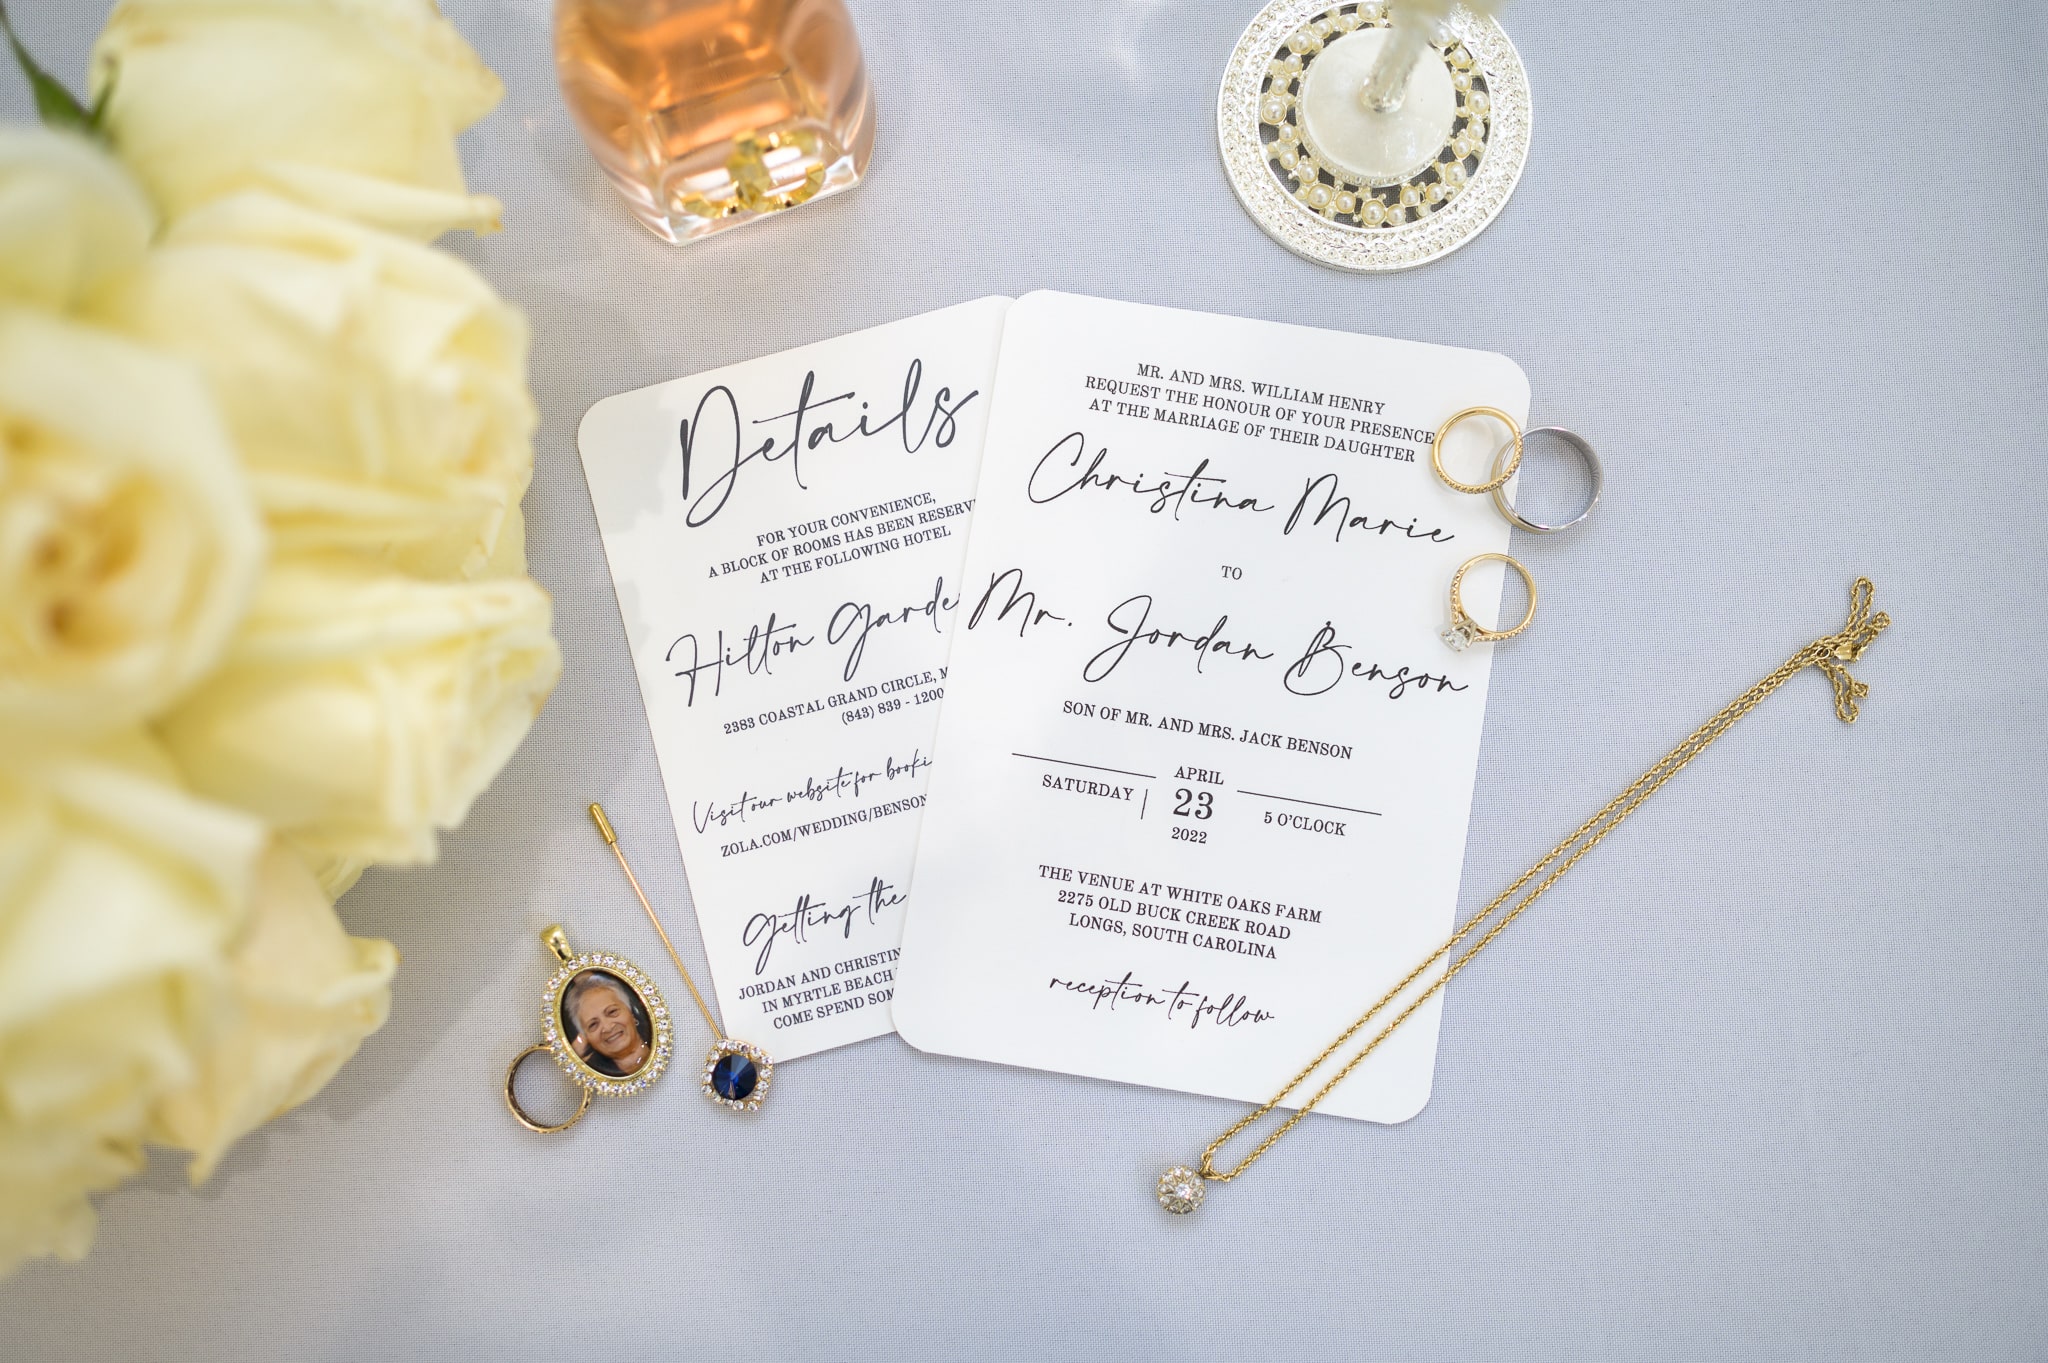 Wedding invitations with details - The Venue at White Oaks Farm